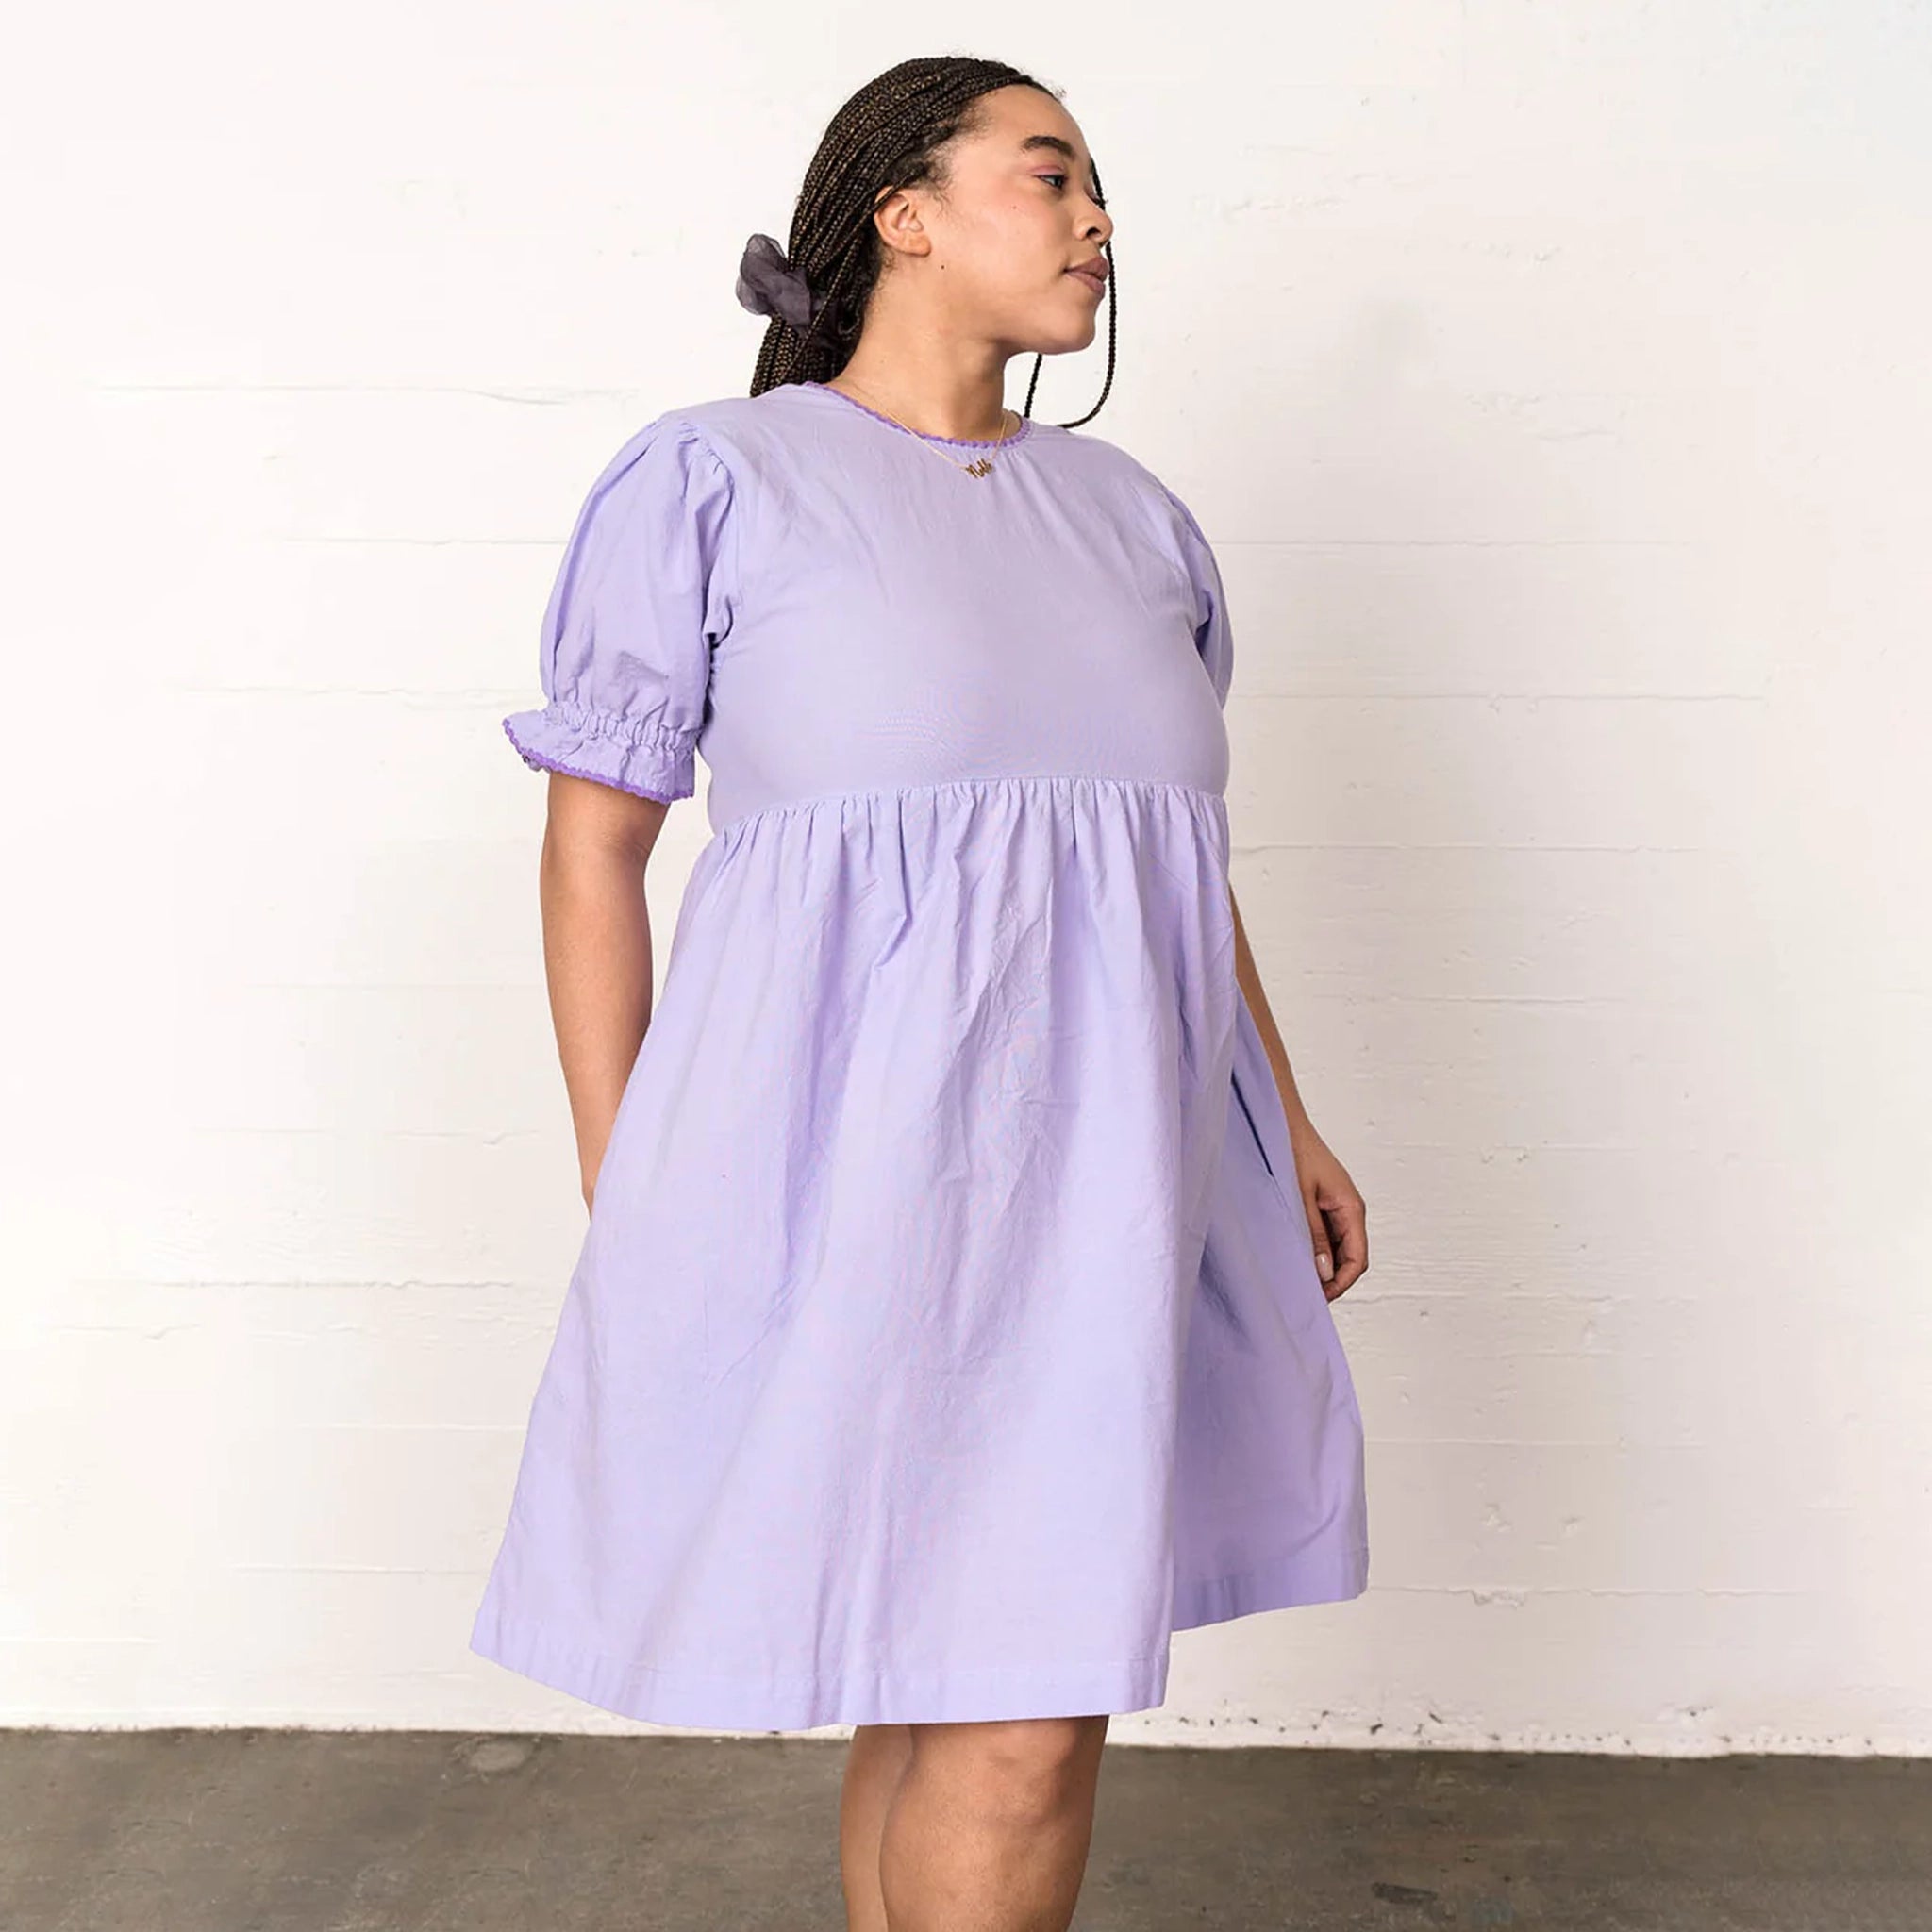 In front of a cream wall is a model wearing a lavender baby doll style dress with puffy sleeve details.